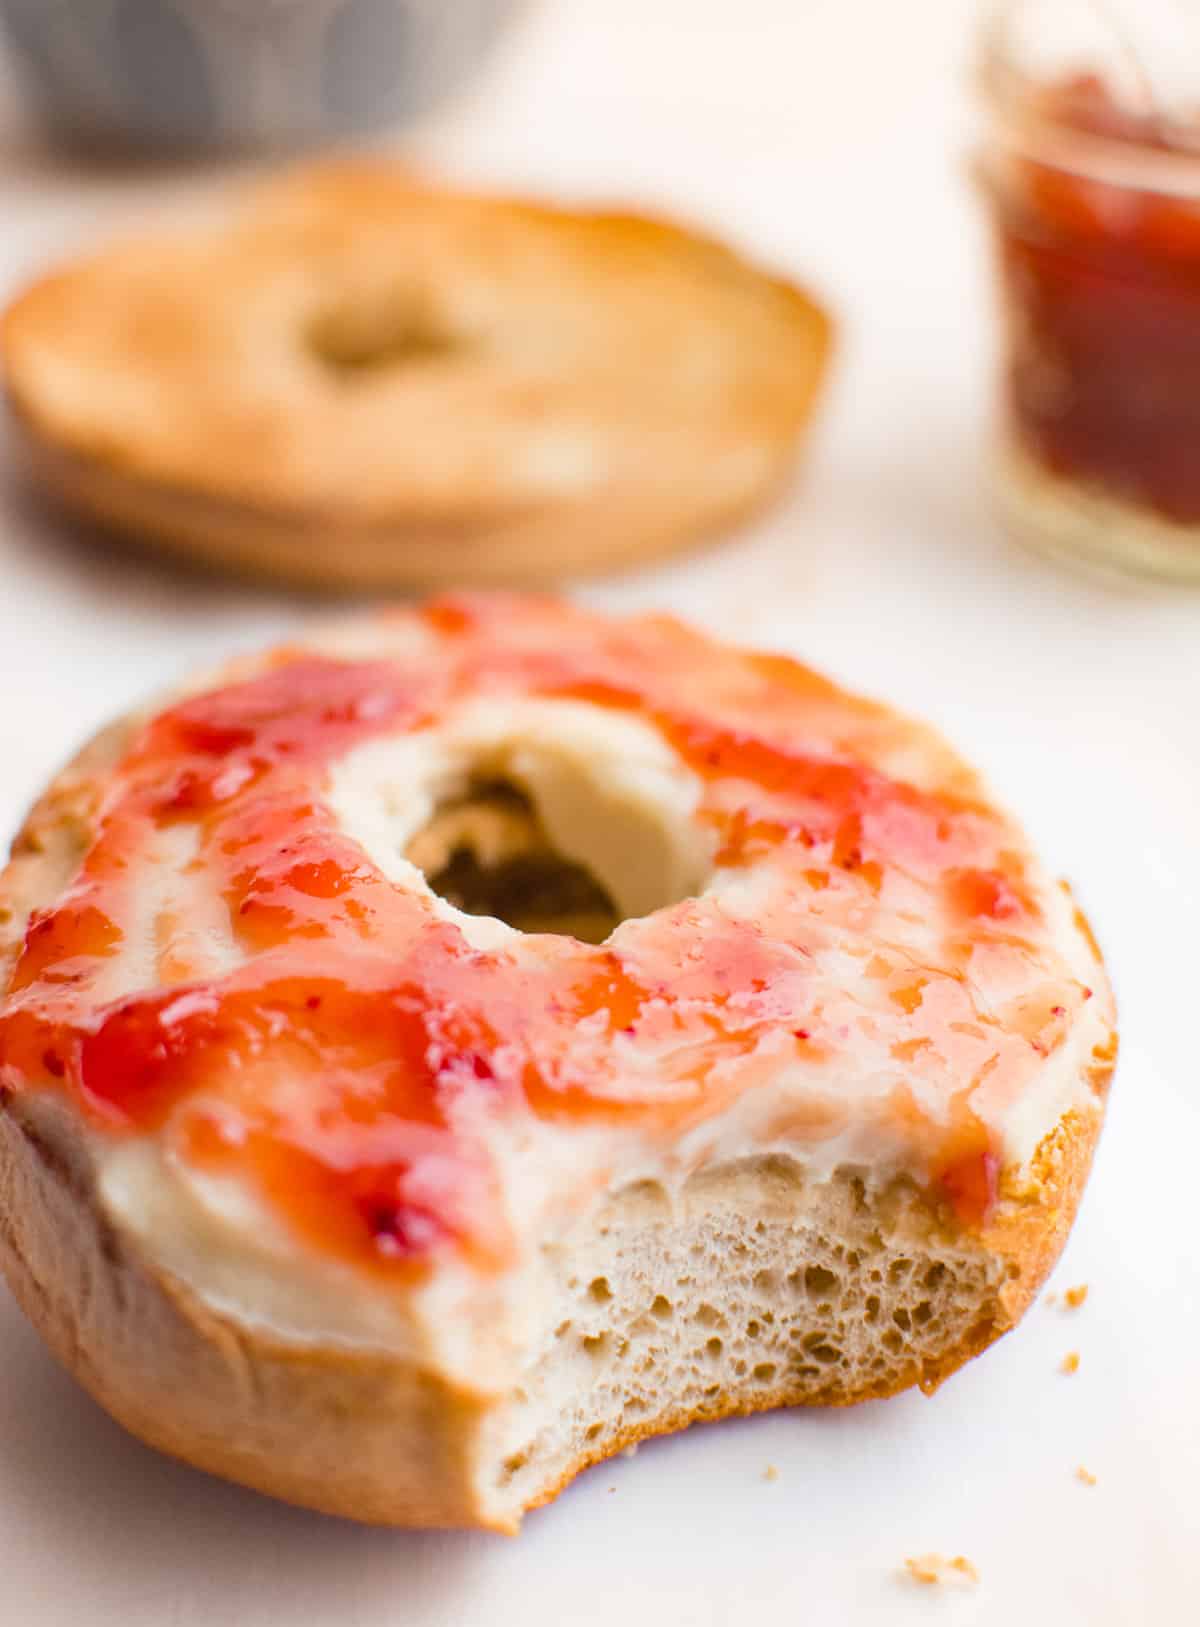 A plain bagel topped with cashew cream cheese and strawberry jam, with a bite taken out.